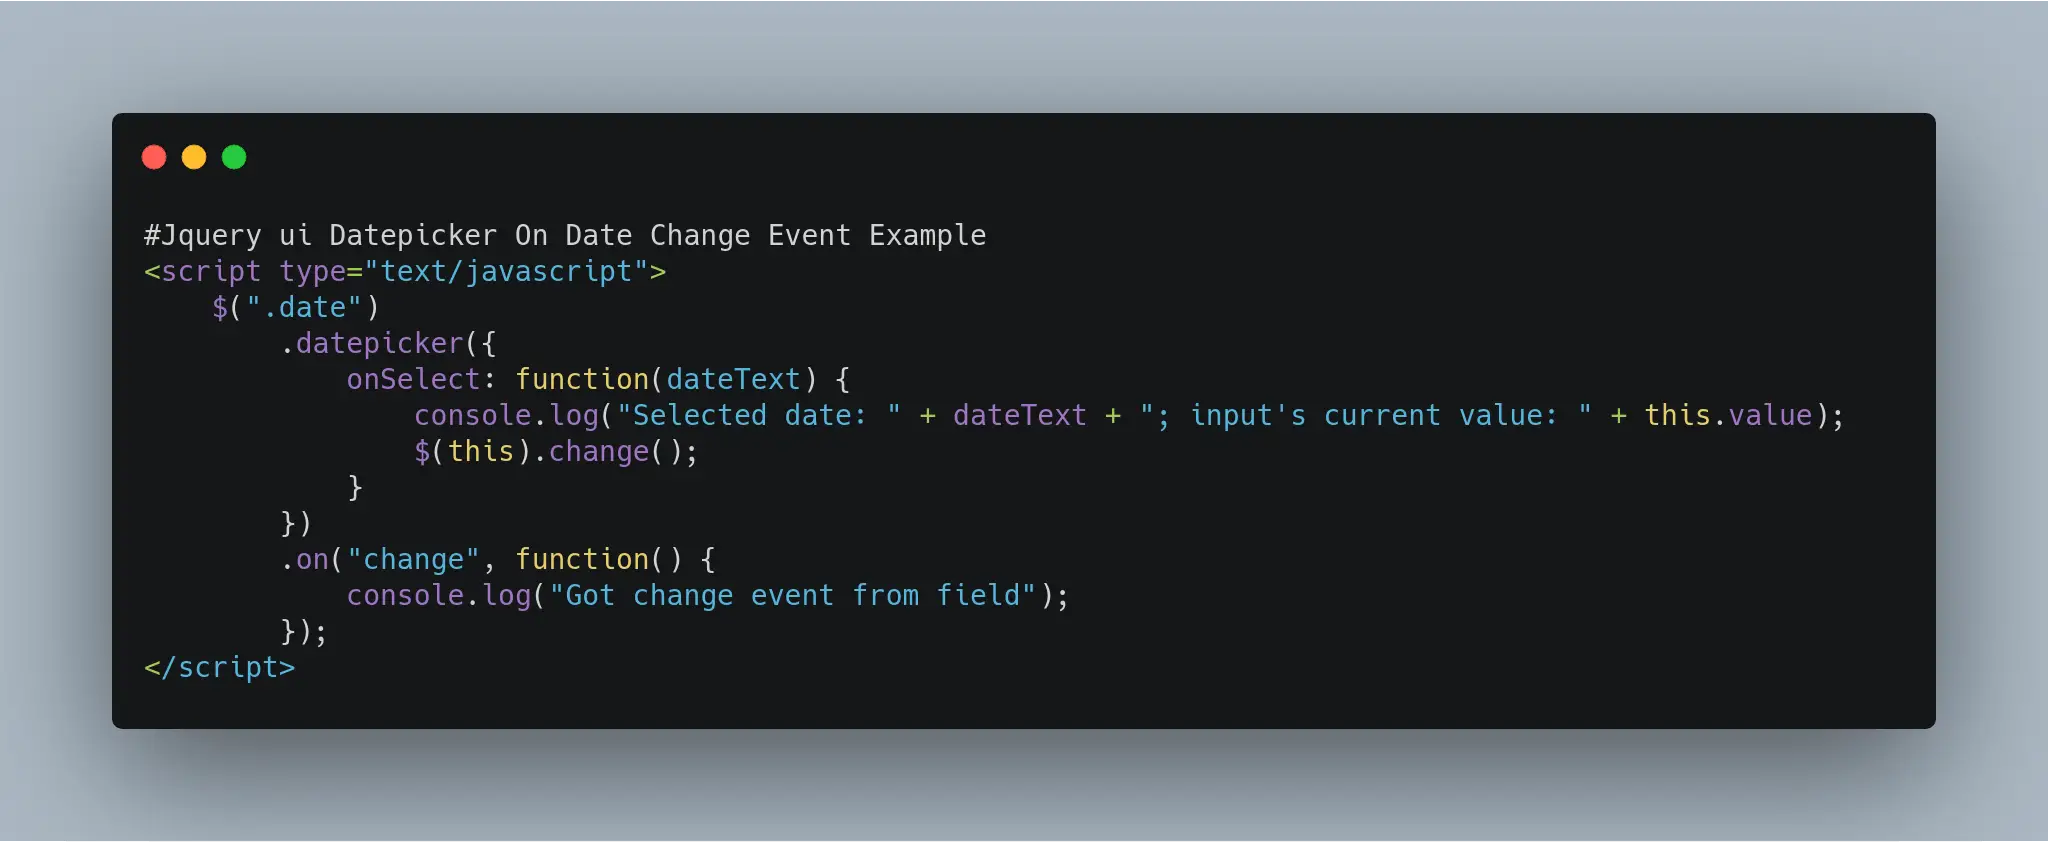 Jquery UI Datepicker On Date Change Event Example